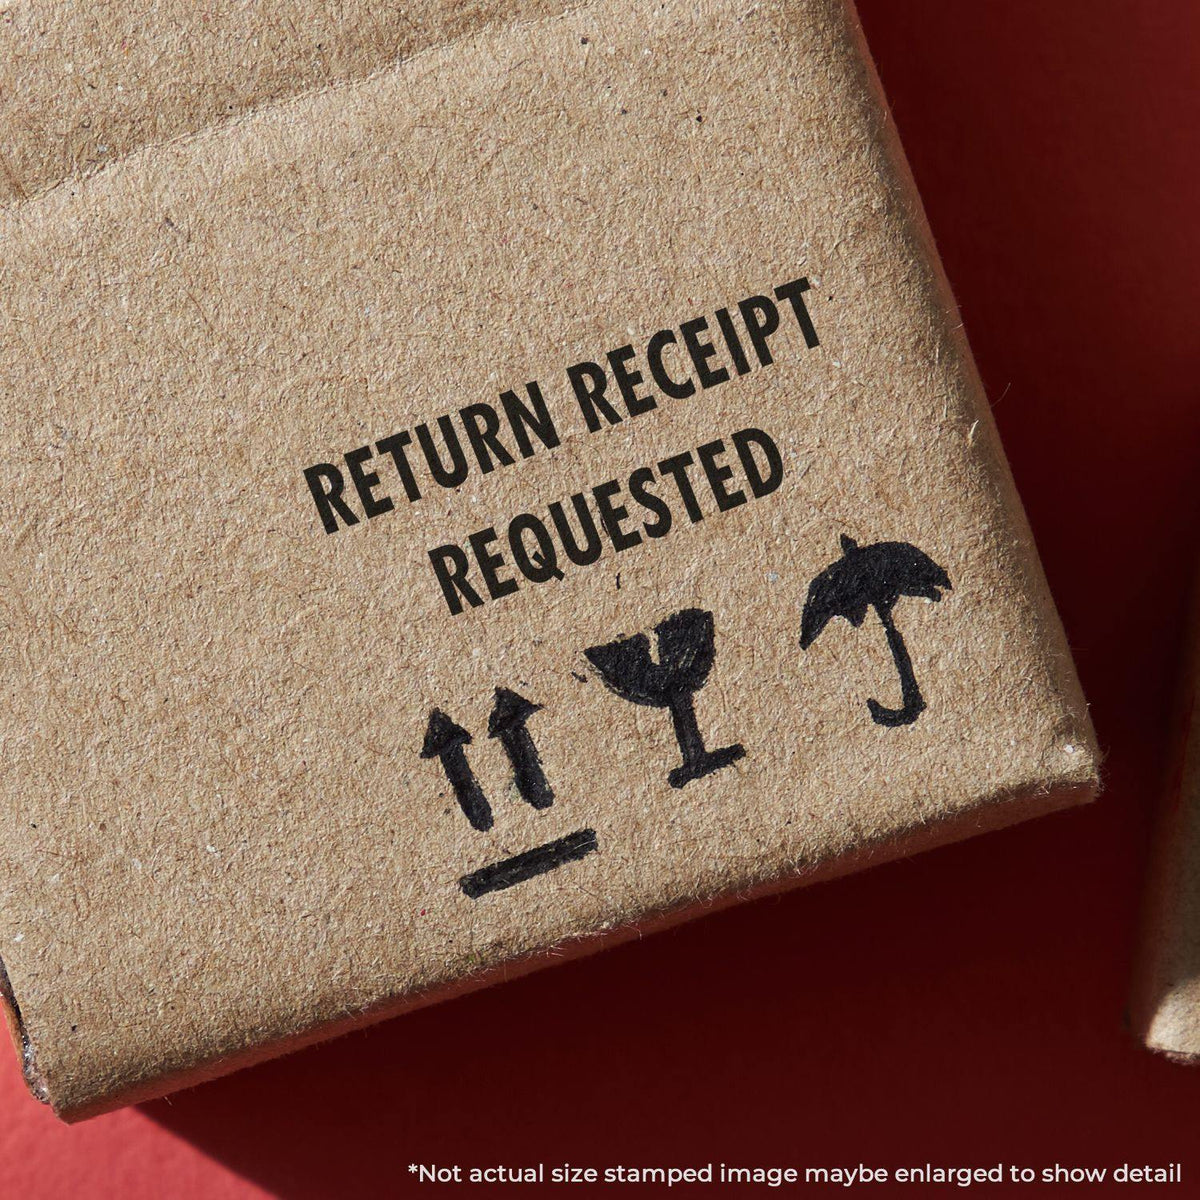 Large Return Receipt Requested Rubber Stamp In Use Photo